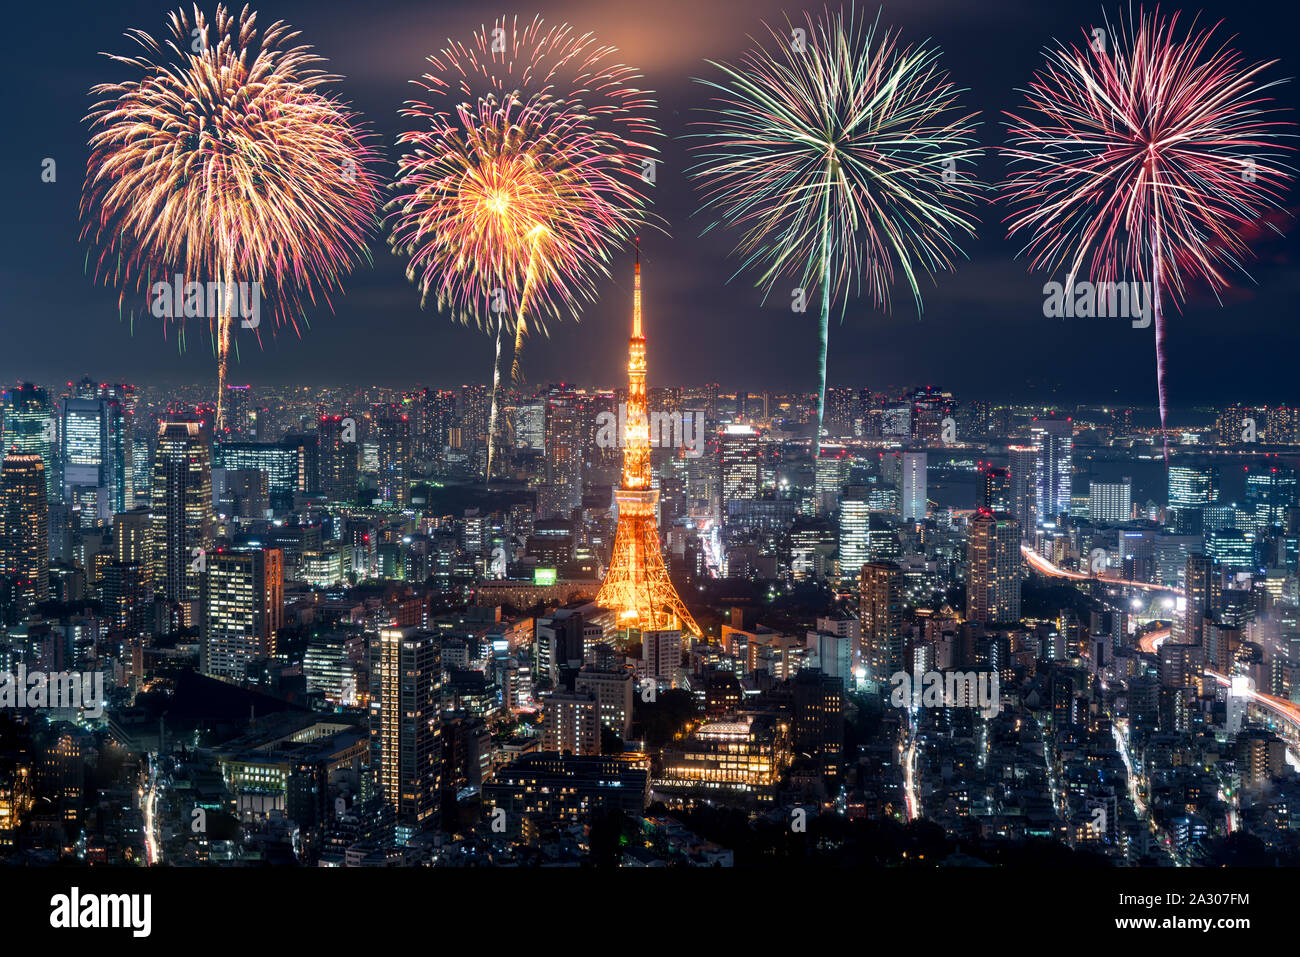 Tokyo at night, Fireworks new year celebrating over tokyo cityscape at night in Japan Stock Photo